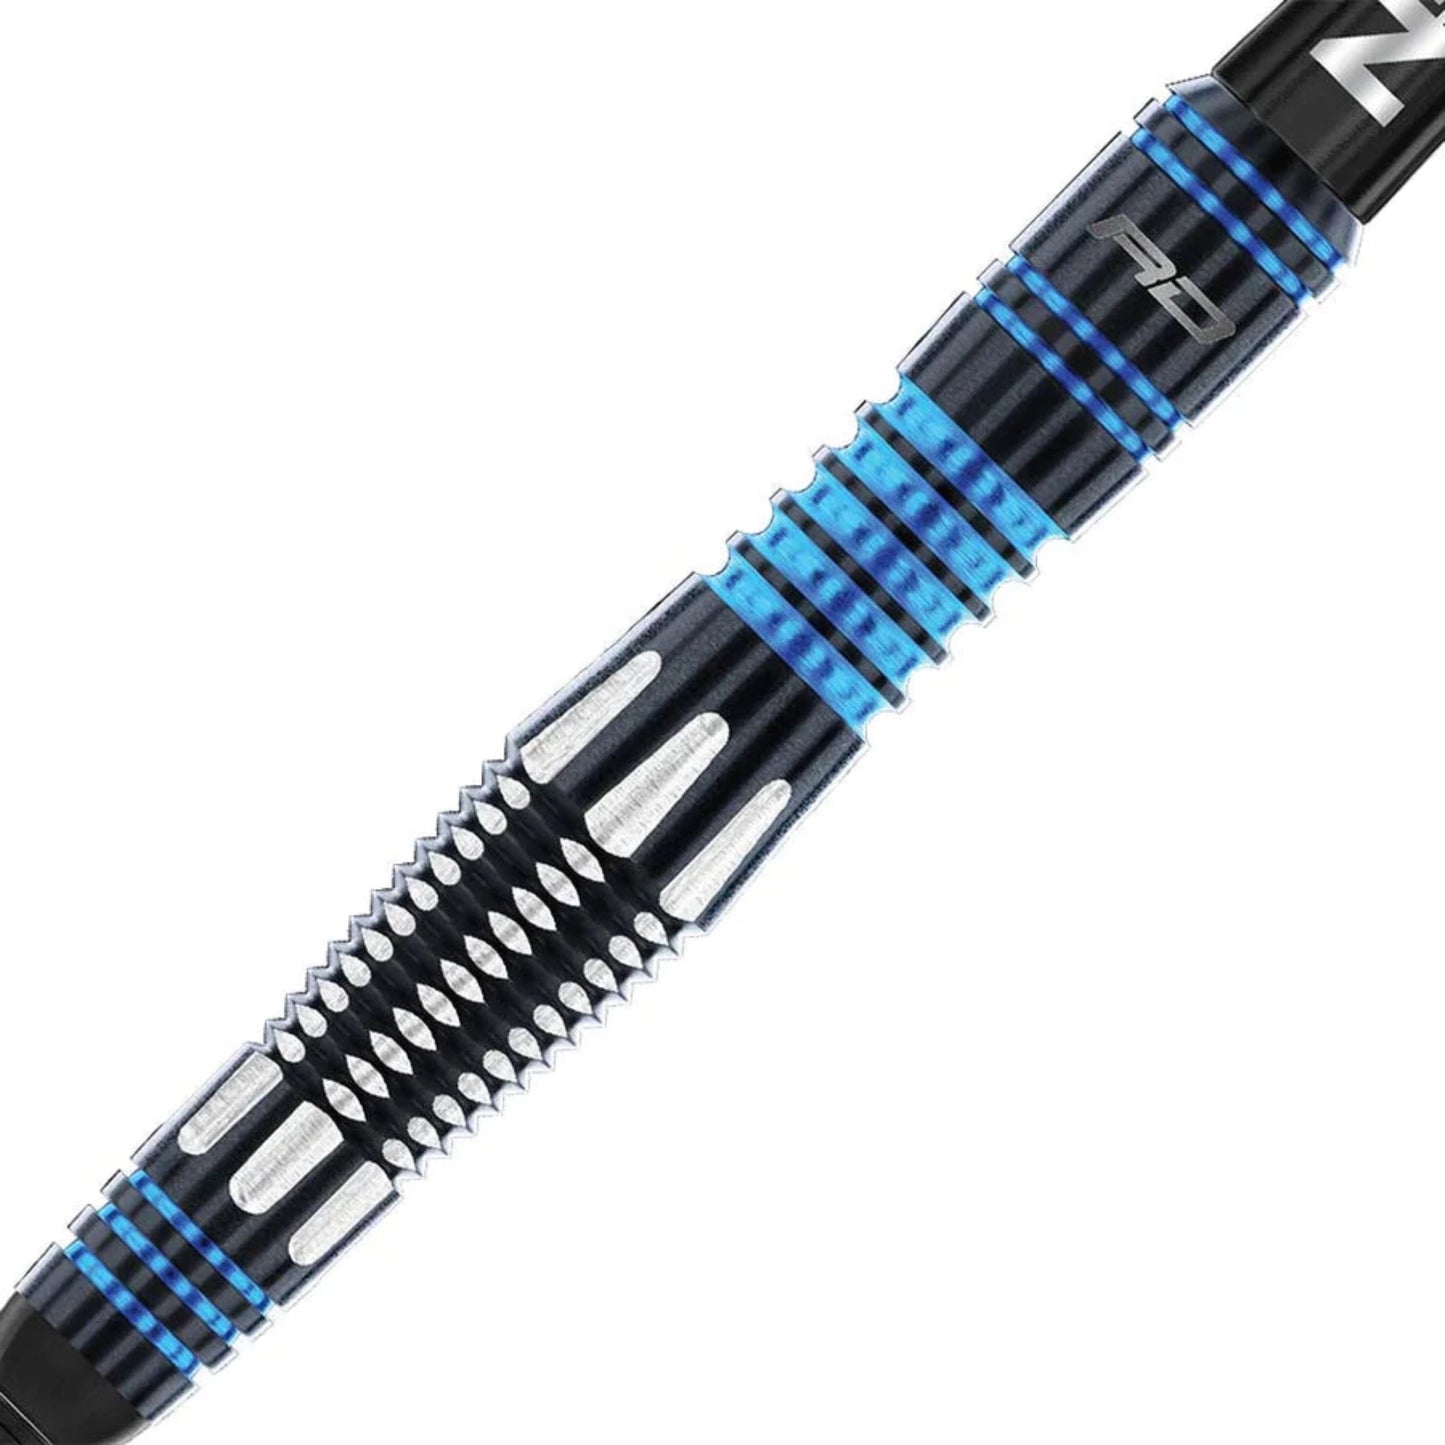 A closeup picture of the barrel on a Red Dragon Marlin Soft Tip Dart. The barrel is black, with silver detailing on the knurling. The grooves of the knurling closer to the shaft are blue. Even closer to the shaft, there are 4 narrower grooves that are a darker blue.